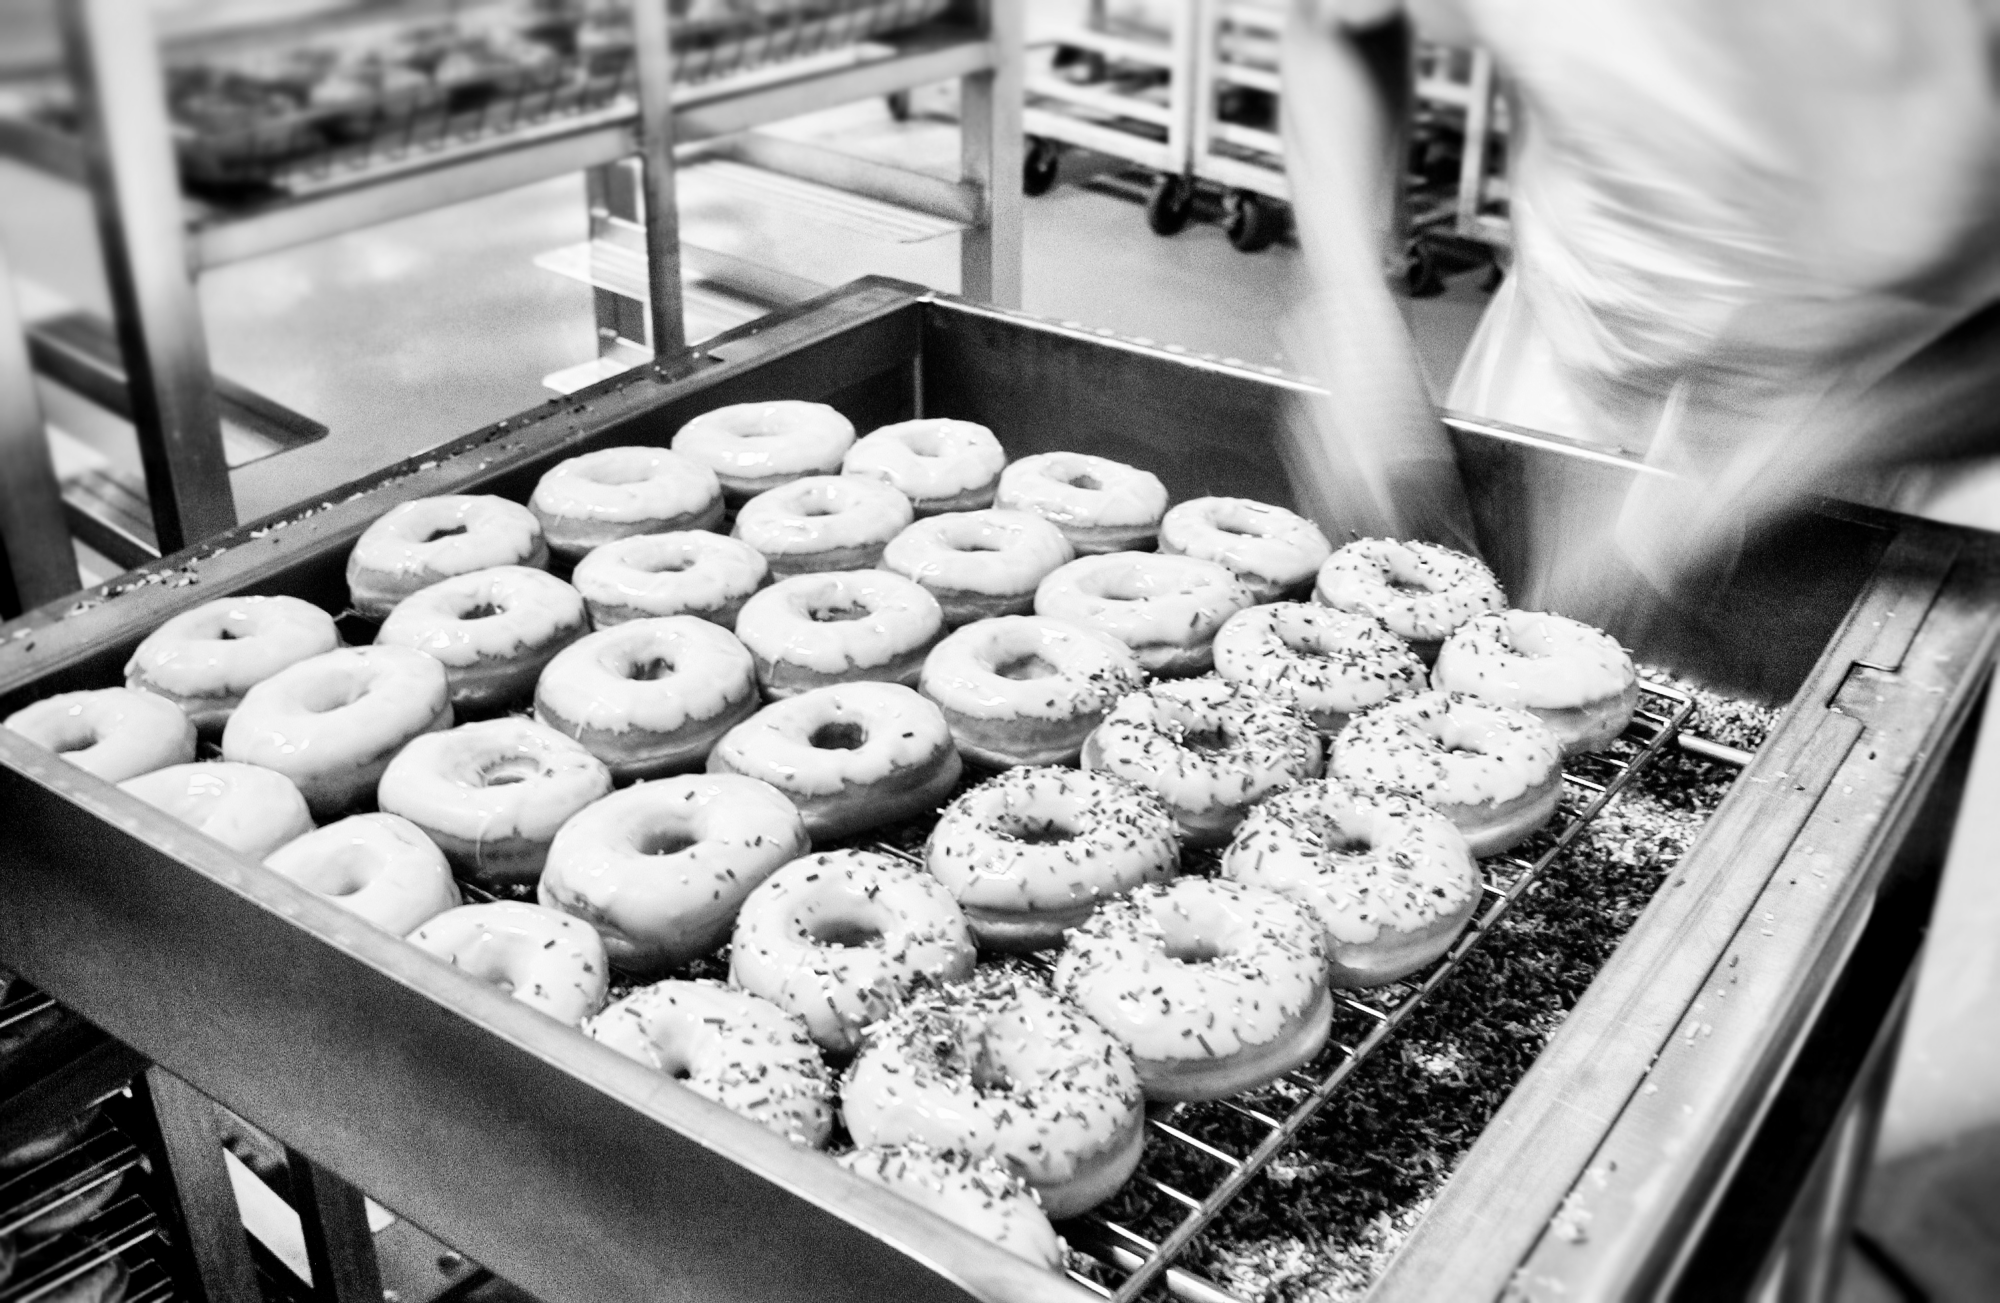 Warehouse Design vs Warehouse Operation | Designing the Bakery vs Making the Donuts